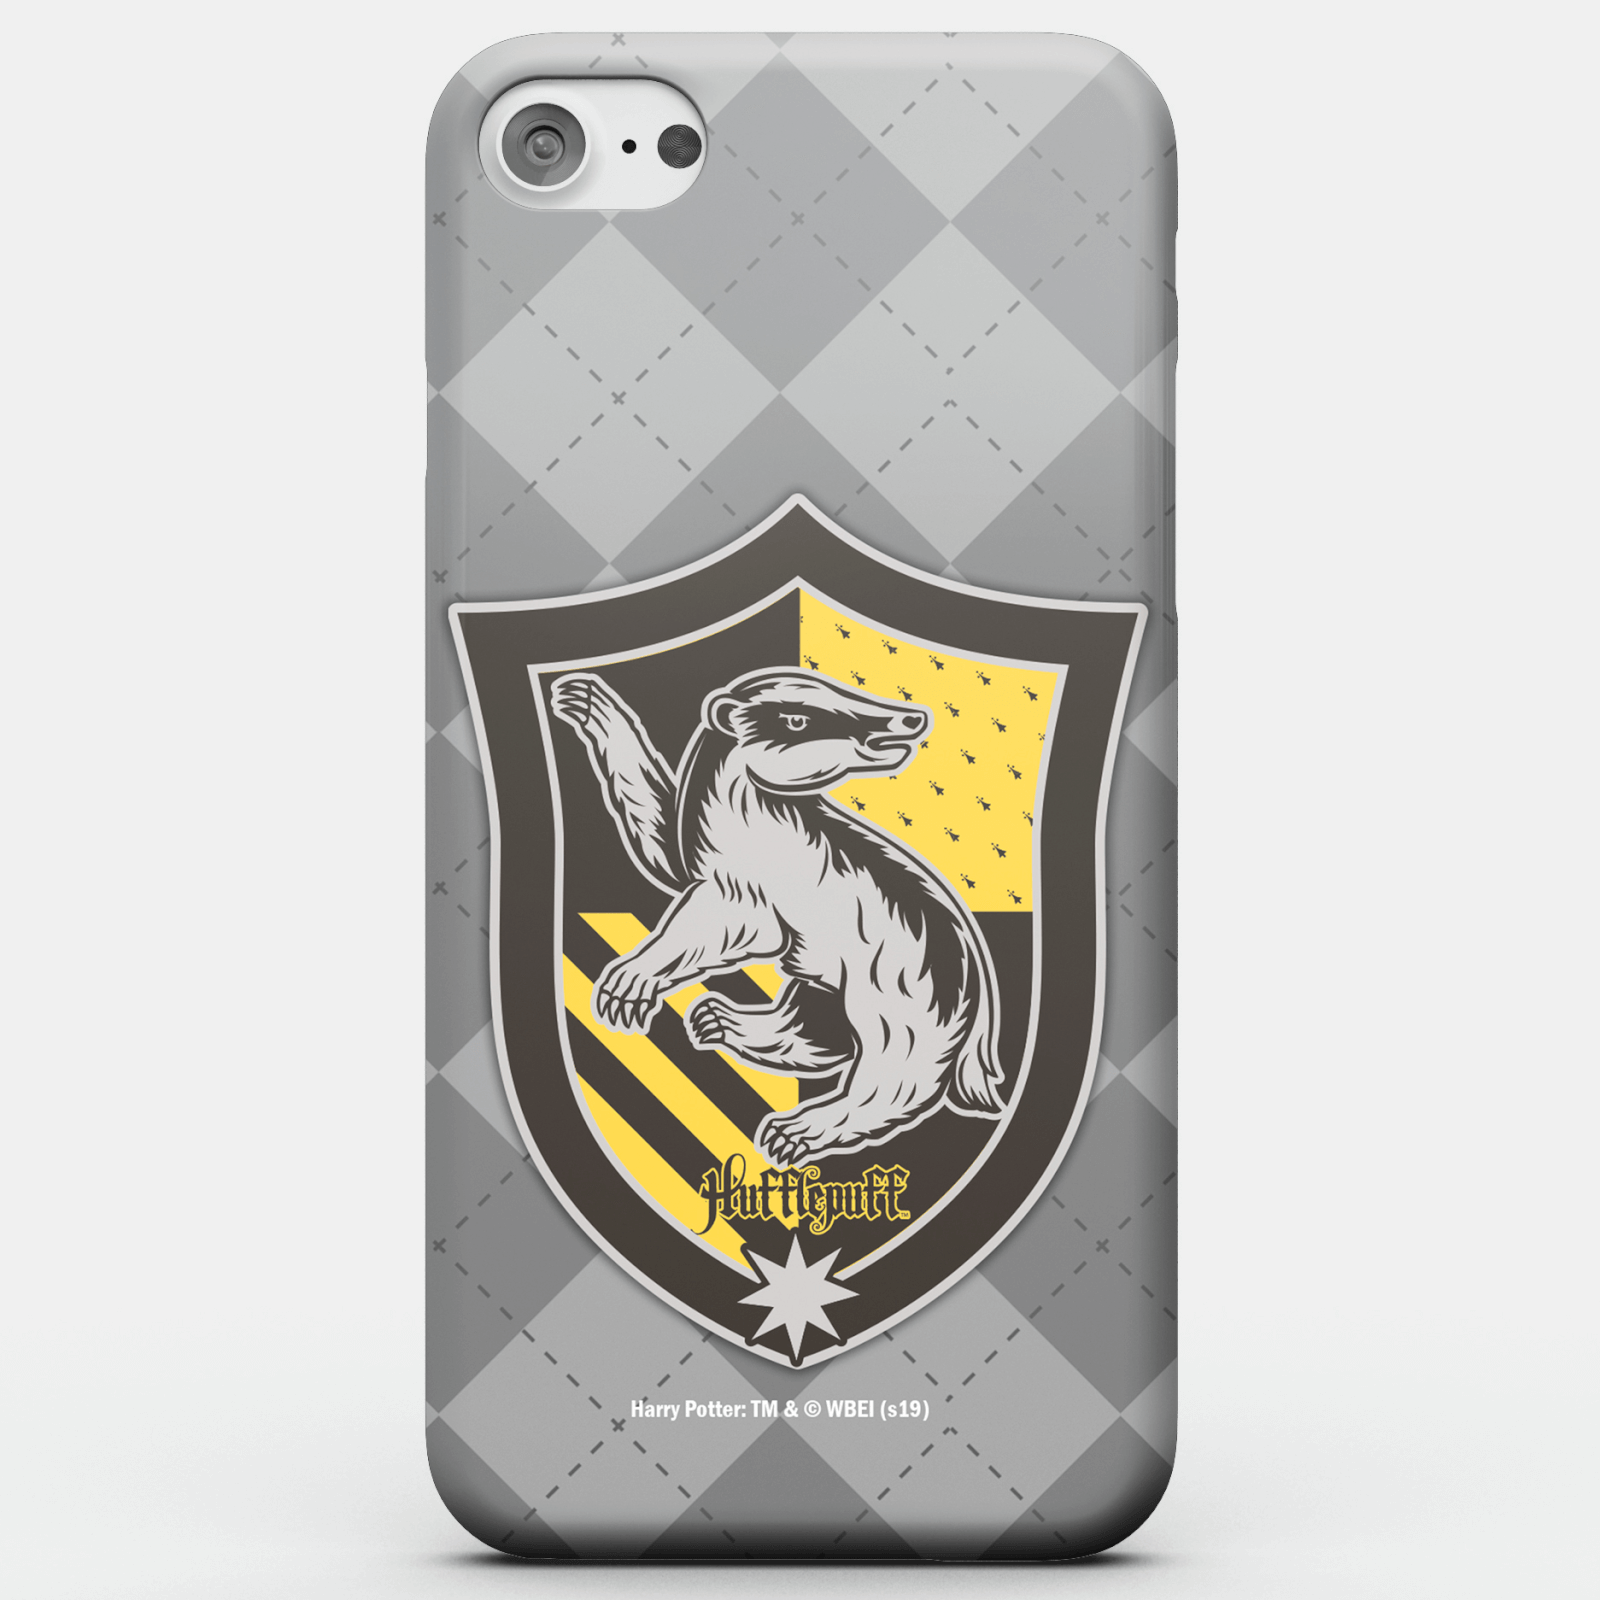 Harry Potter Phonecases Hufflepuff Crest Phone Case for iPhone and Android - iPhone 8 Plus - Snap Case - Gloss